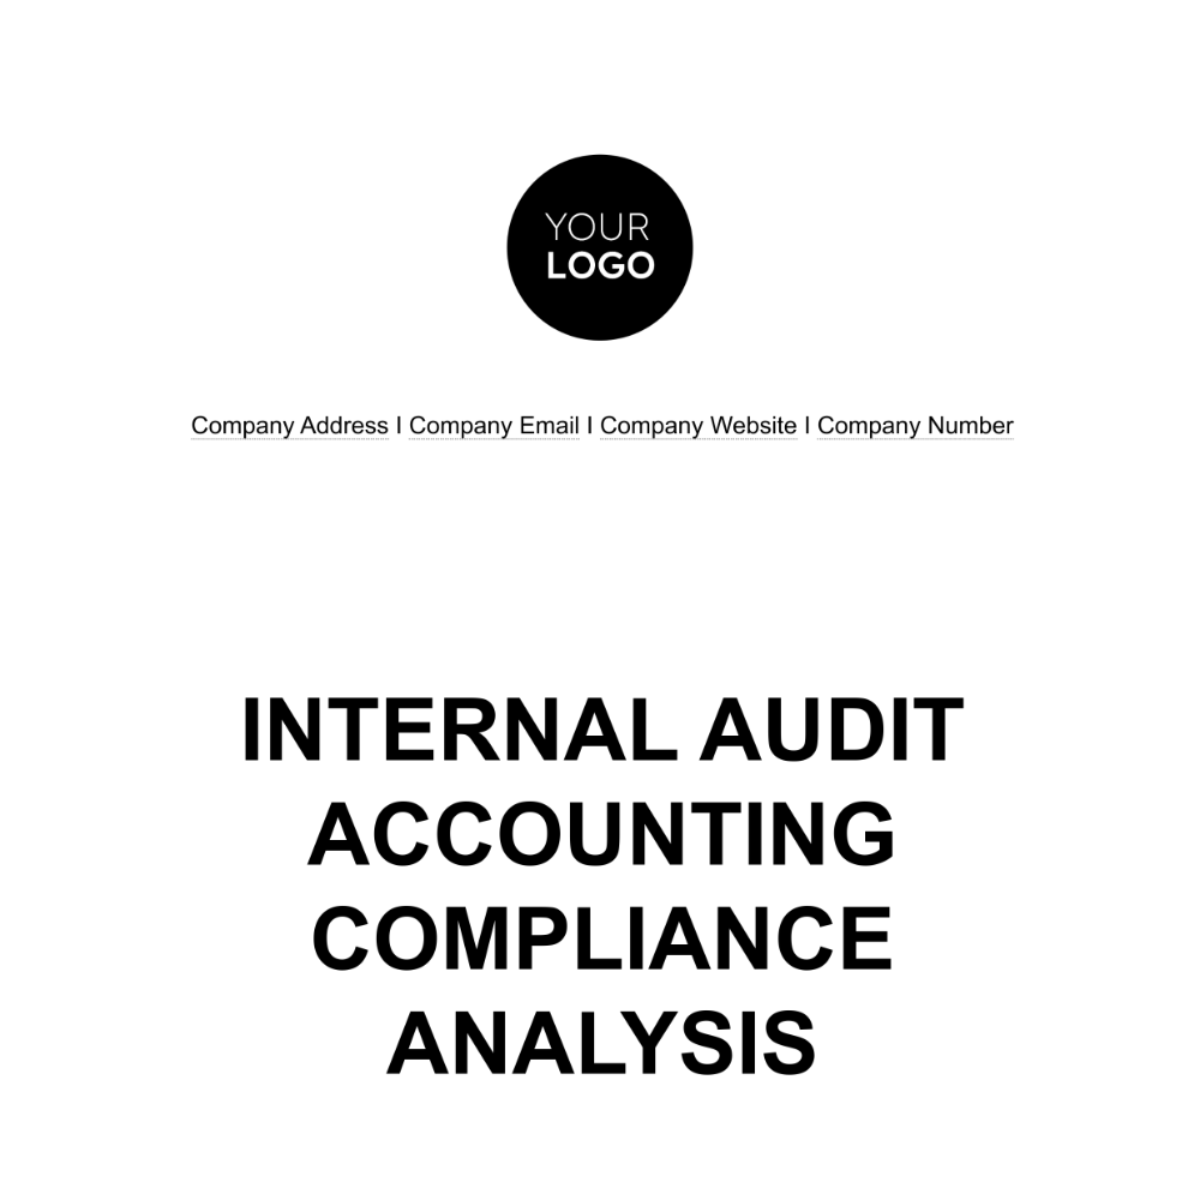 Internal Audit Accounting Compliance Analysis Template